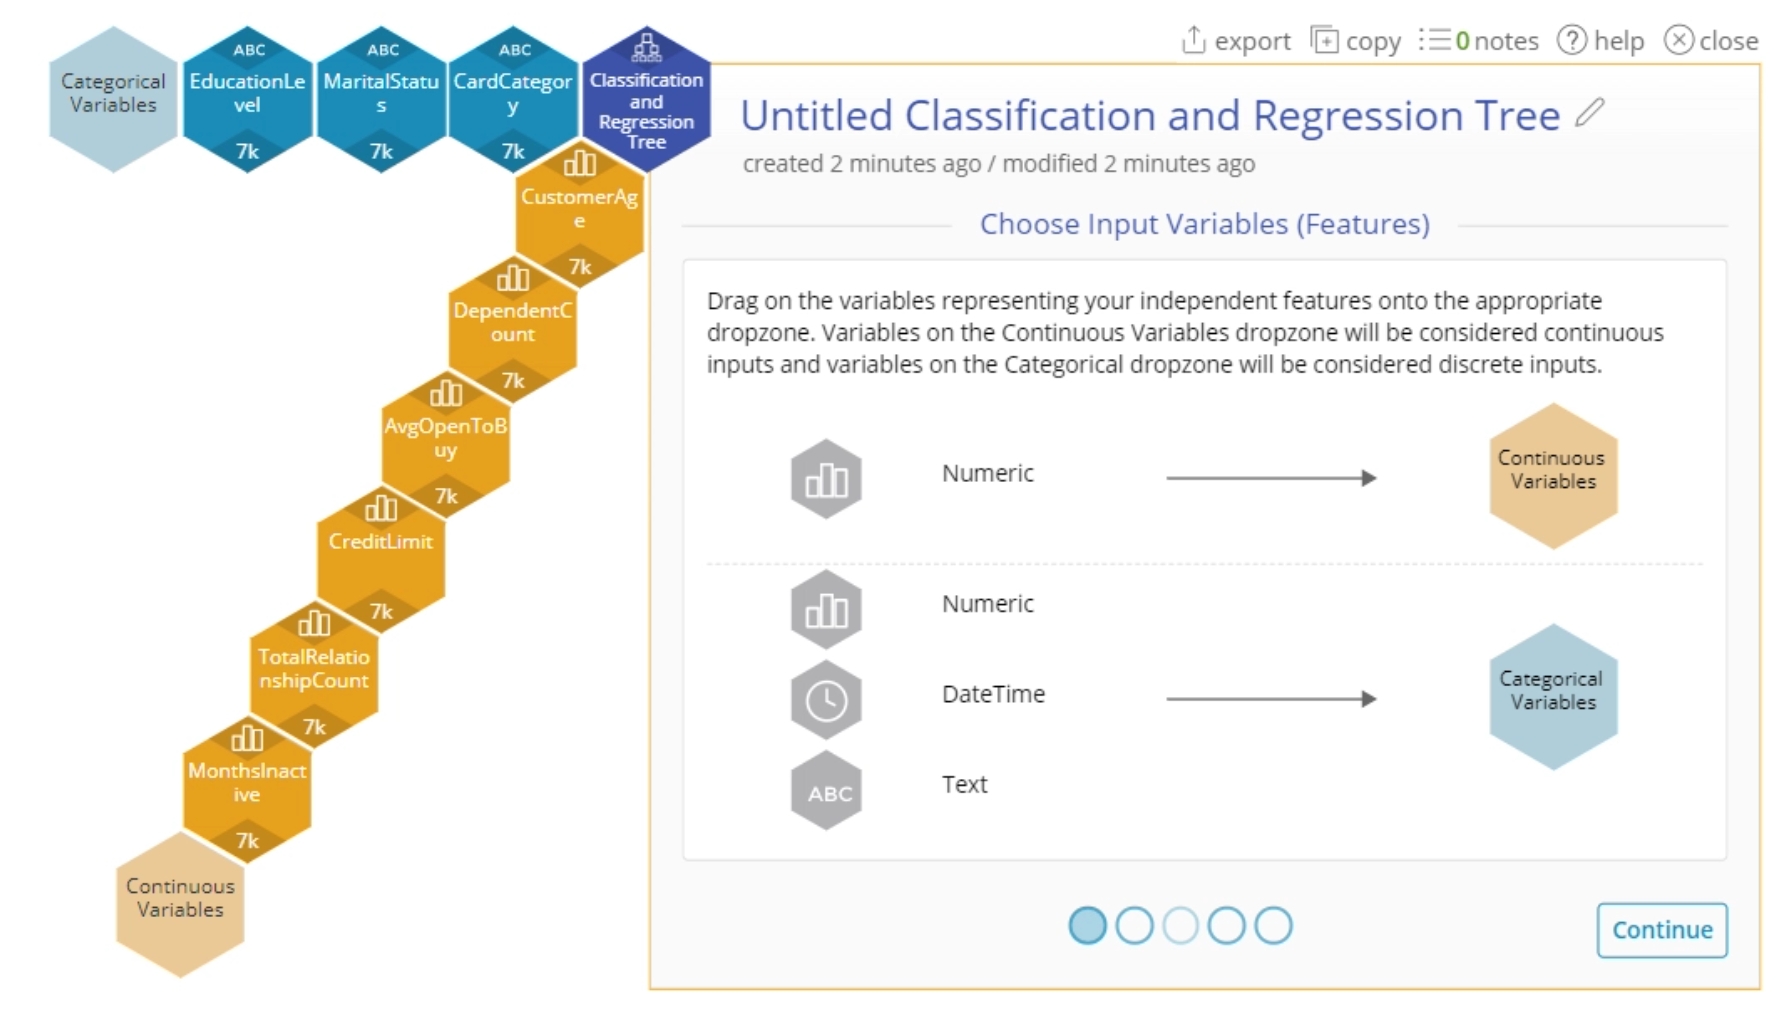 Classification and regression tree with categorical variables.